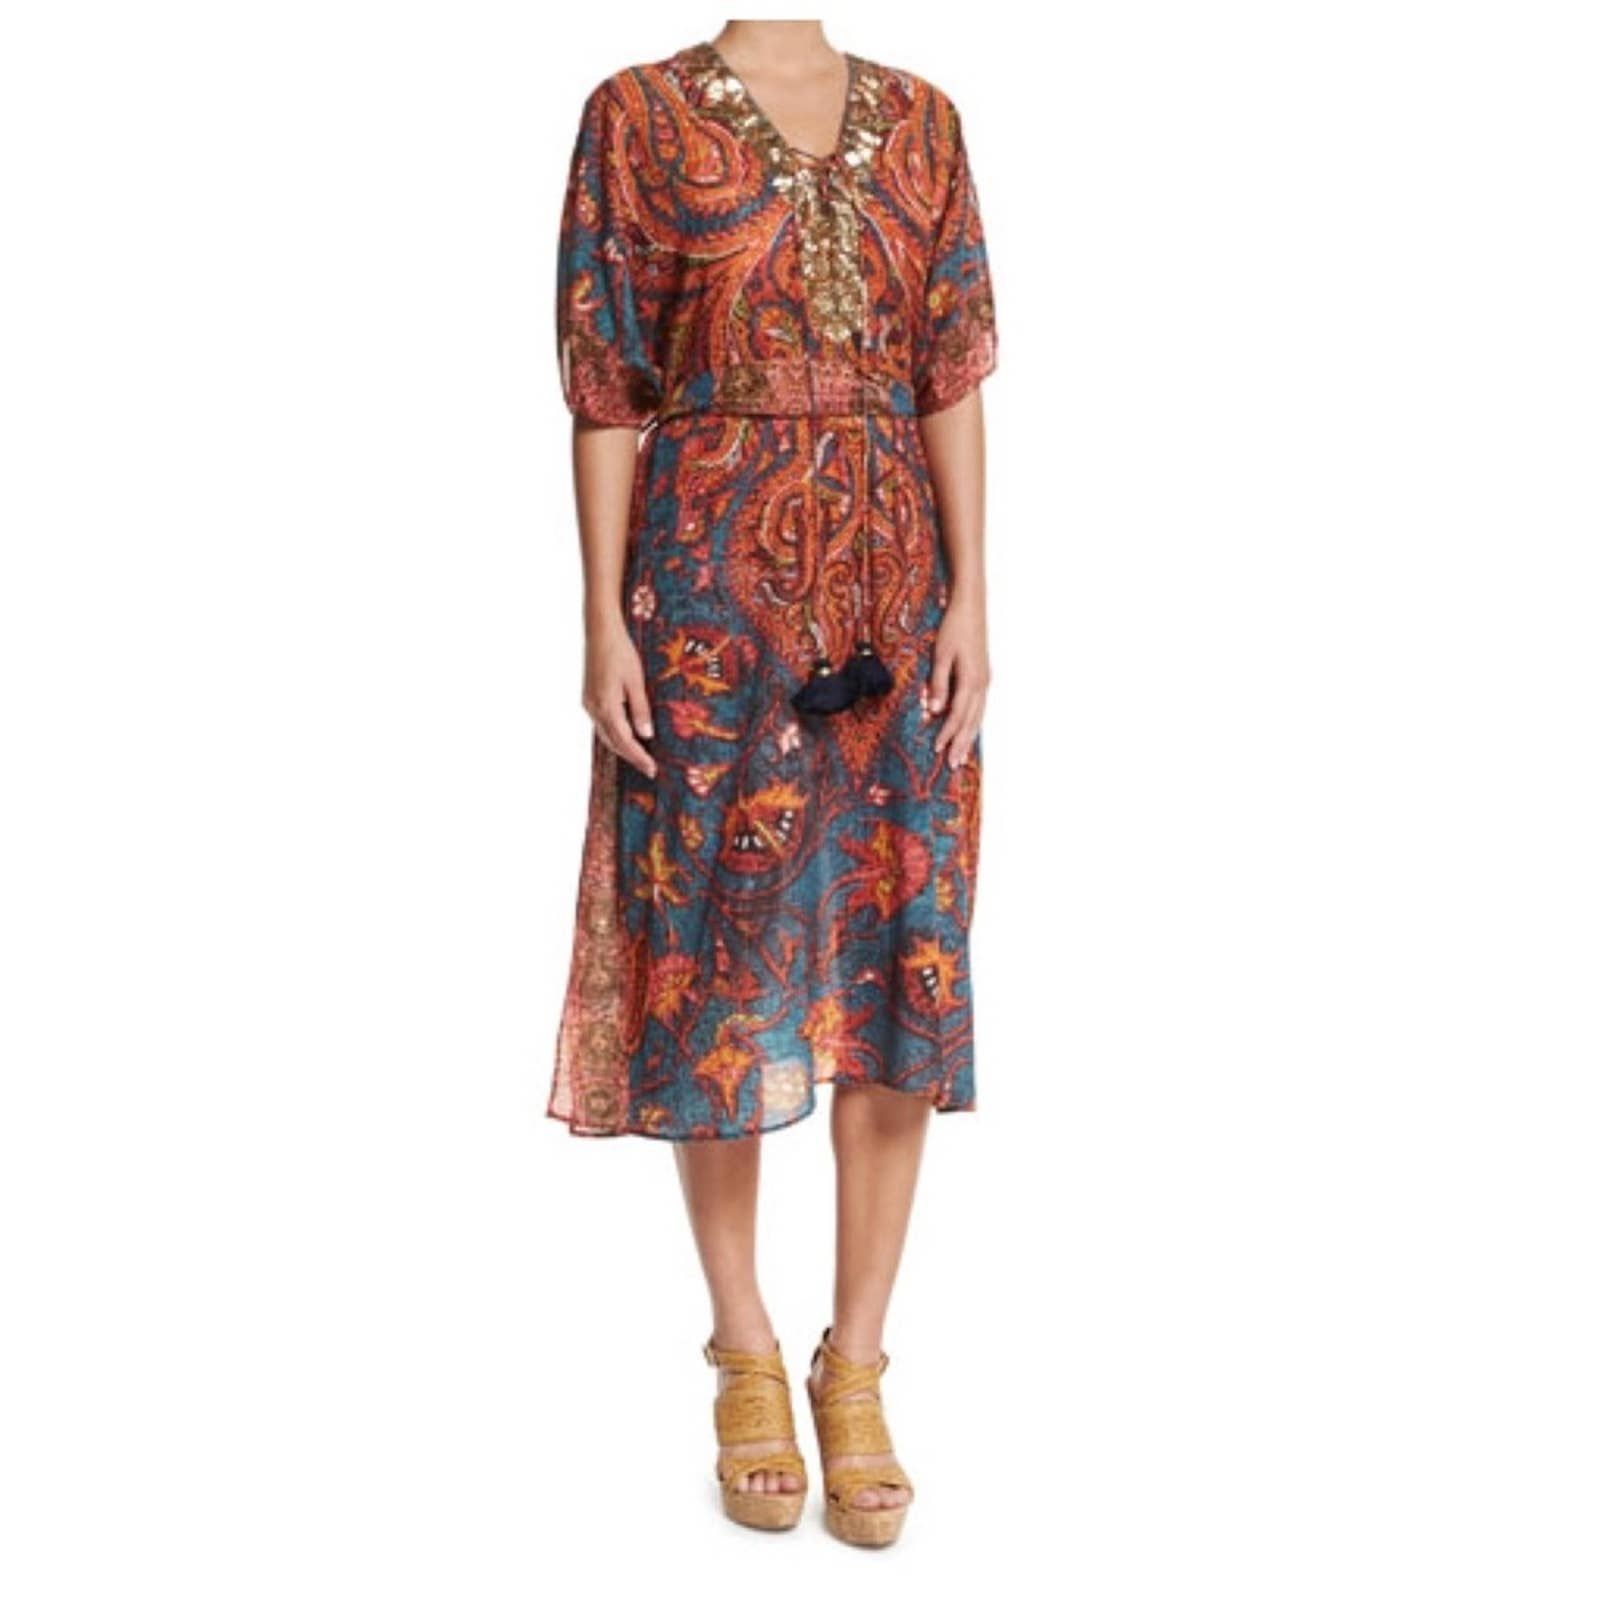 Figue Figue Brianna Embellished Caftan Cover-Up Medium Large Size M / US 6-8 / IT 42-44 - 1 Preview